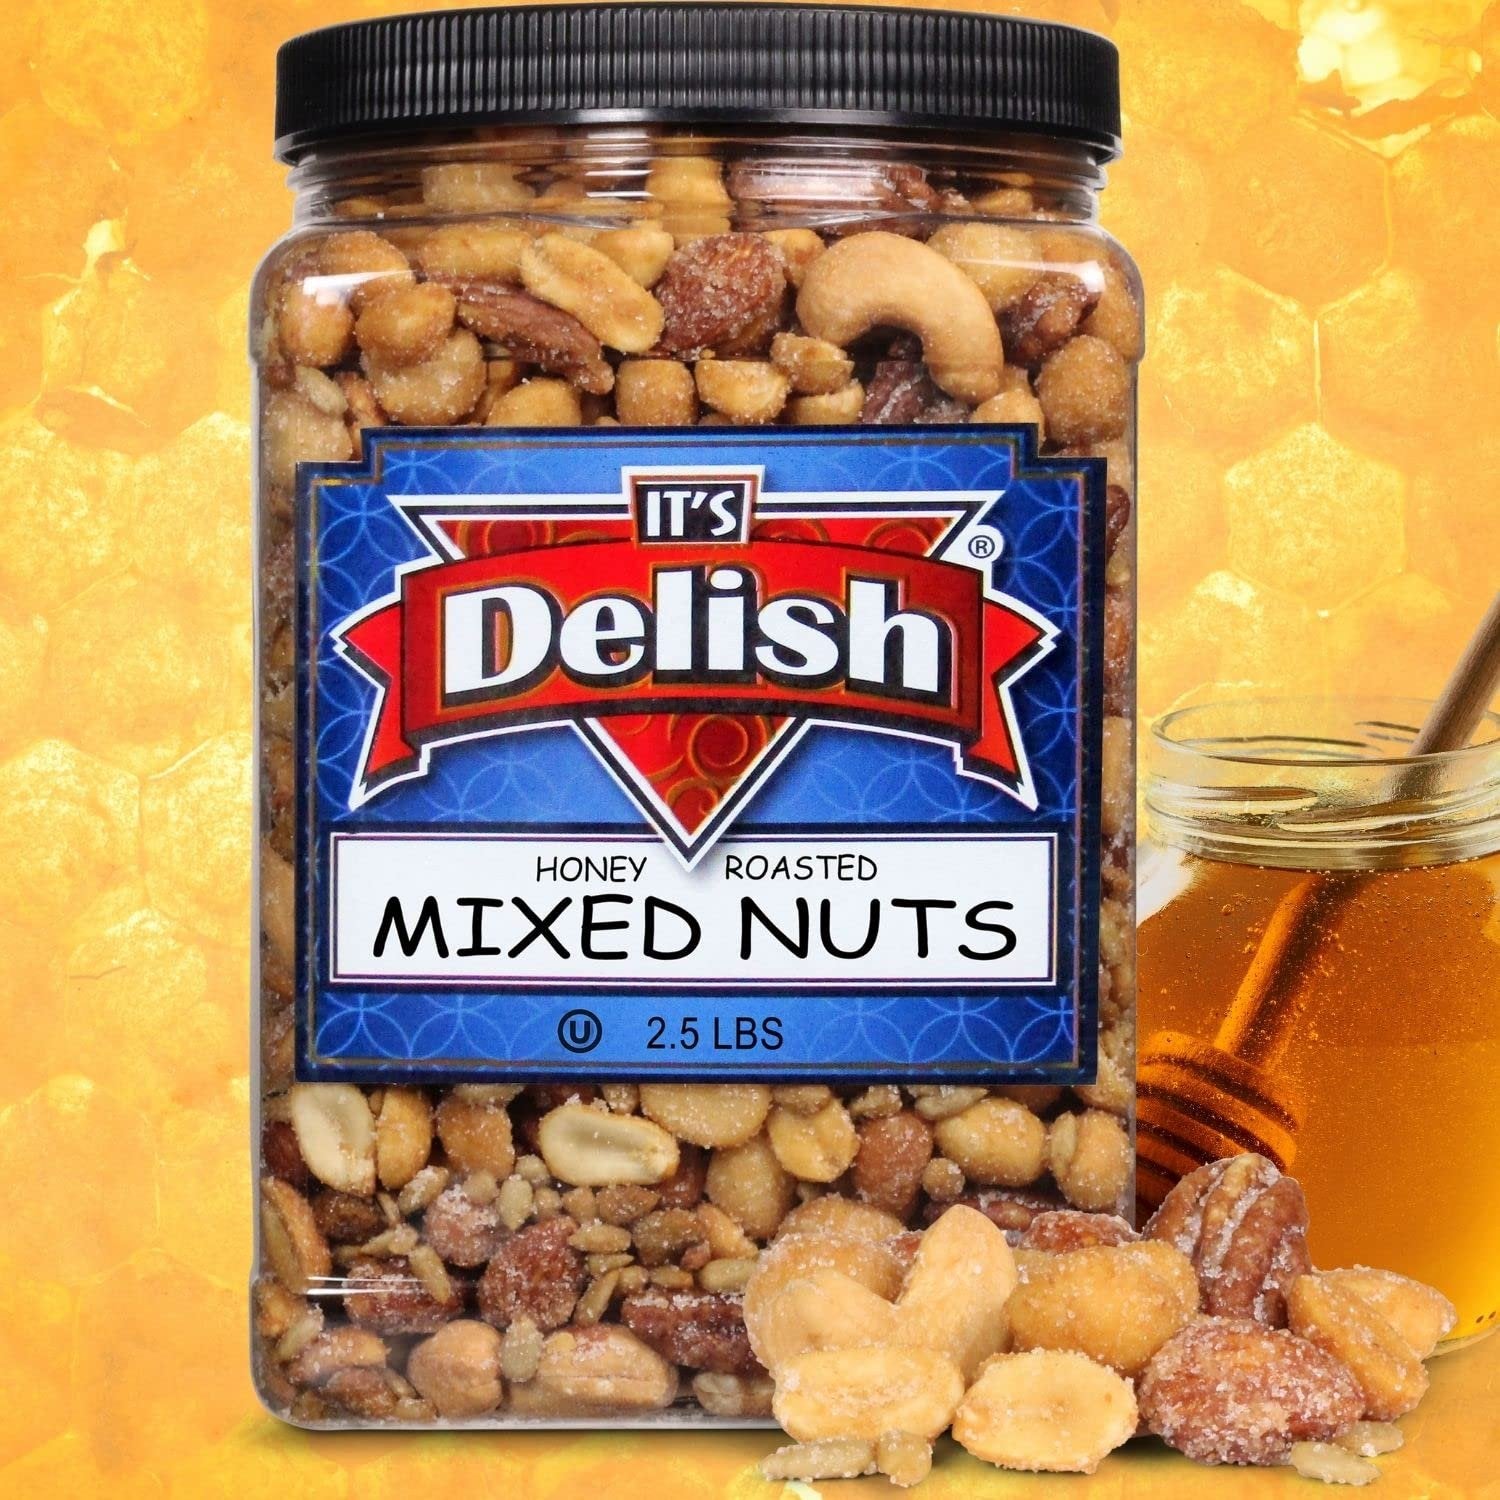 Honey Roasted Mixed Nuts, 2.5 LBS Reusable Jumbo Container – Its Delish